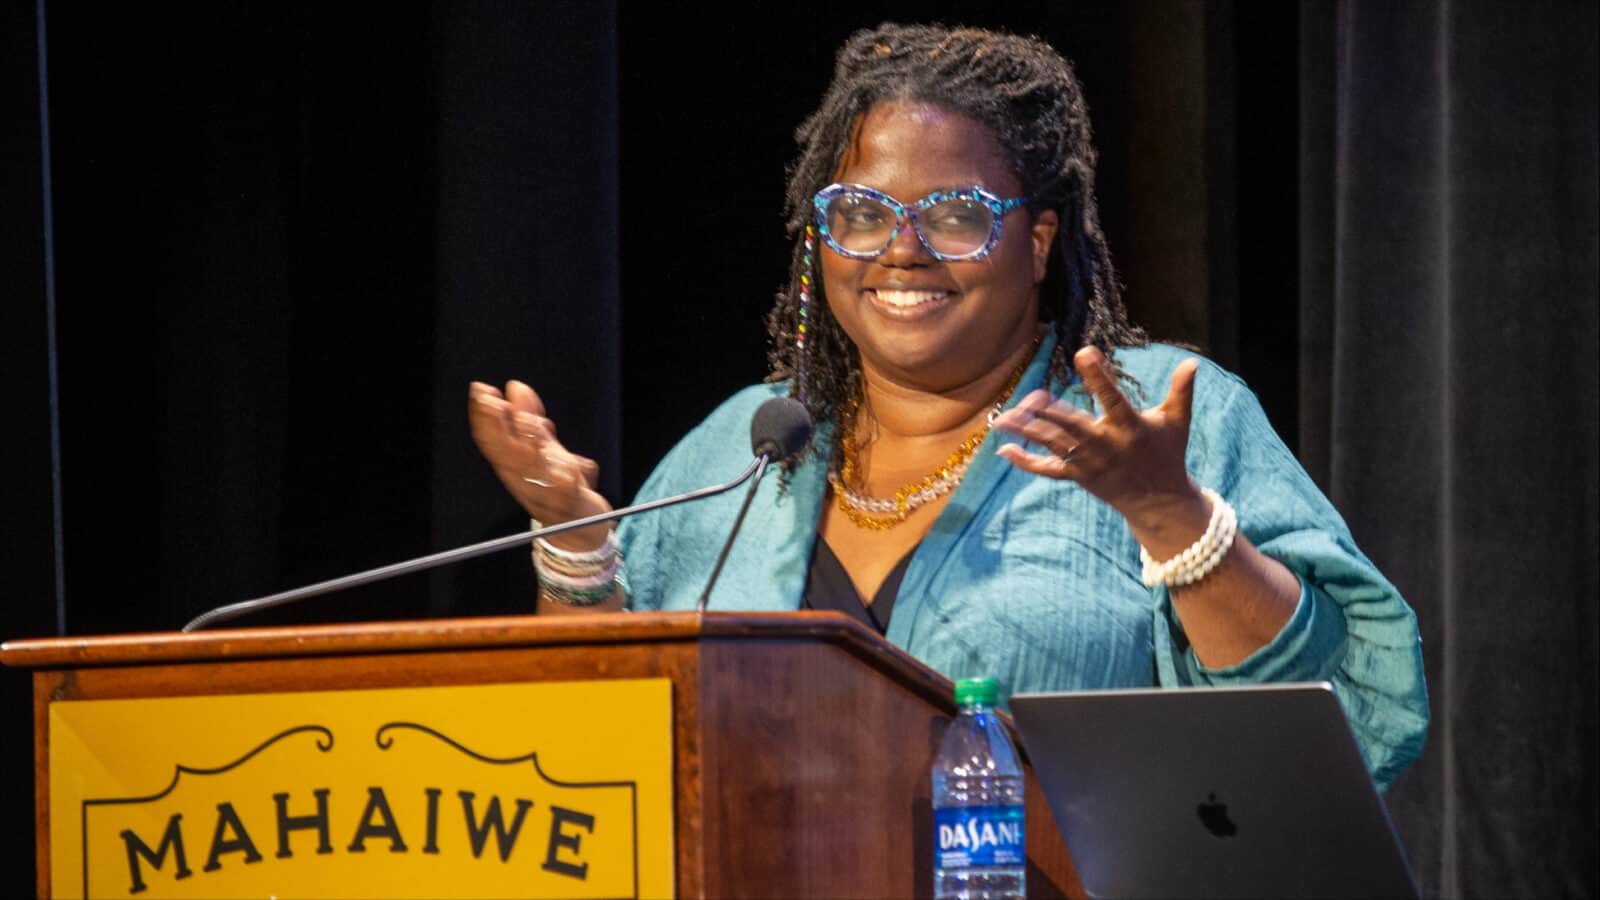 Gwendolyn Van Sant, Founder and CEO of Bridge, welcomes the gathering at the Pay Equity Project's presentation in June 2023 at the Mahaiwe Performing Arts Center. Press photo courtesy of WAM and the Mahaiwe